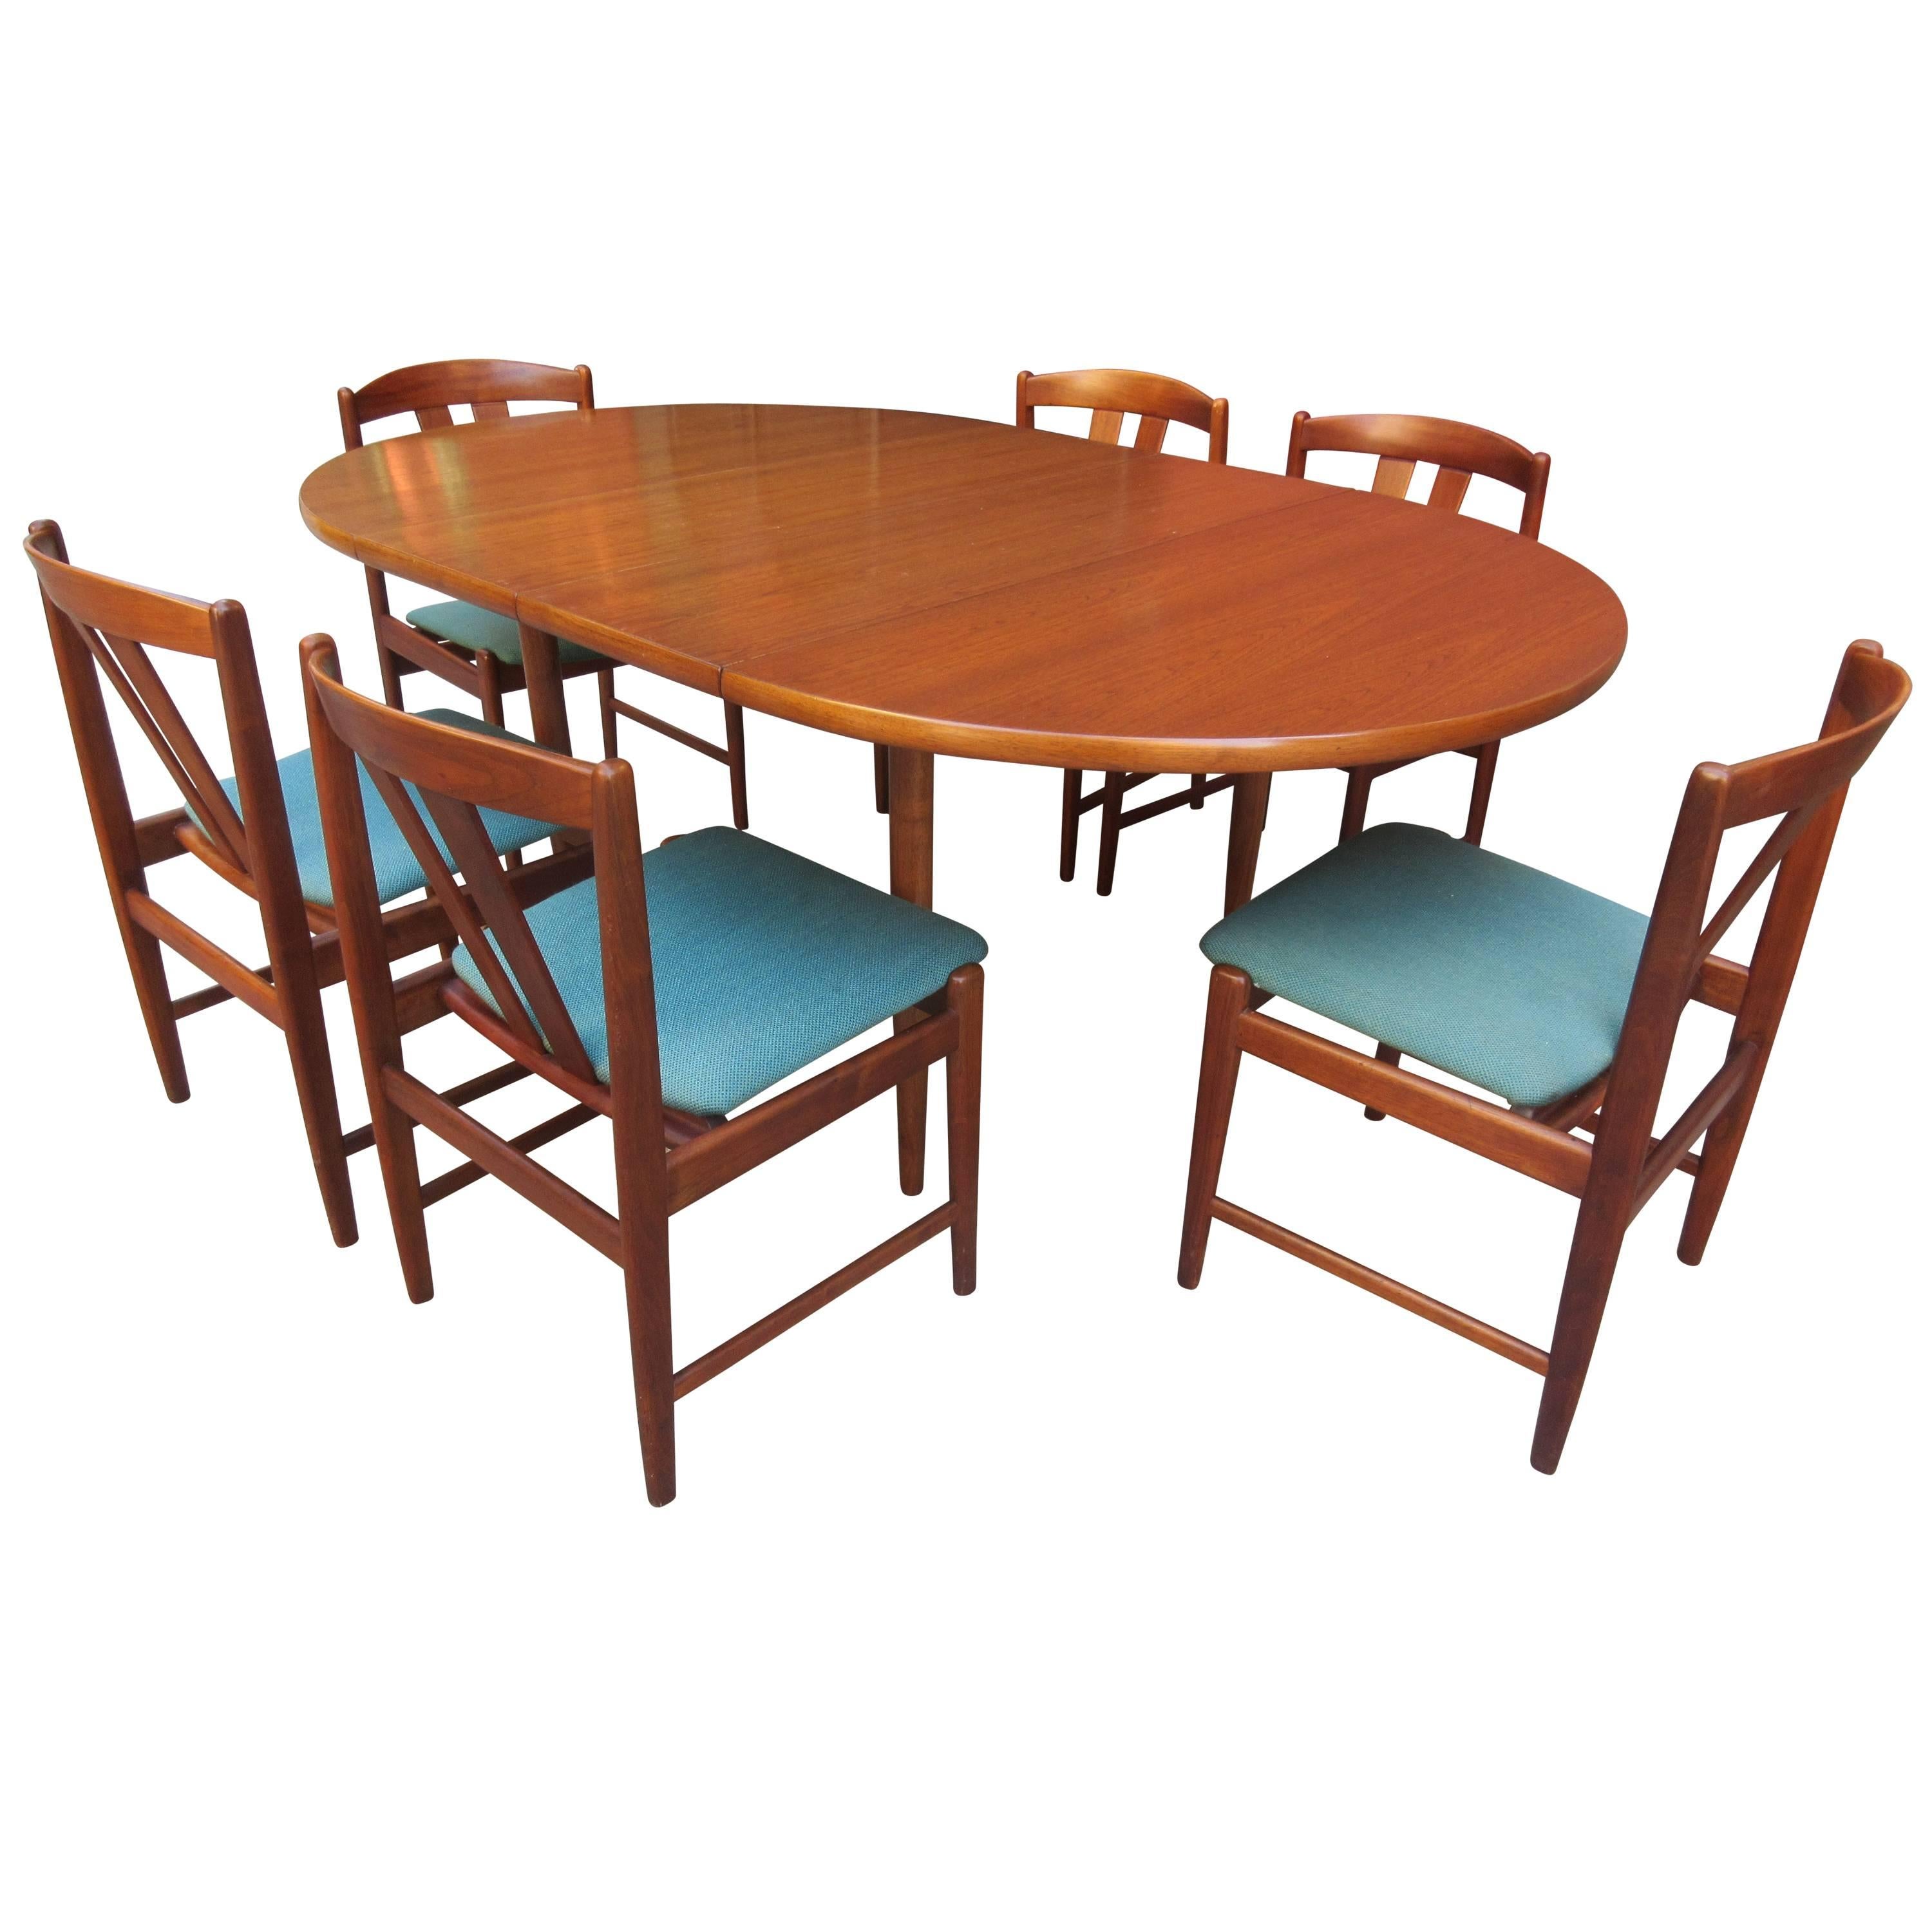 Folke Ohlsson for DUX Teak Table and Chairs Set